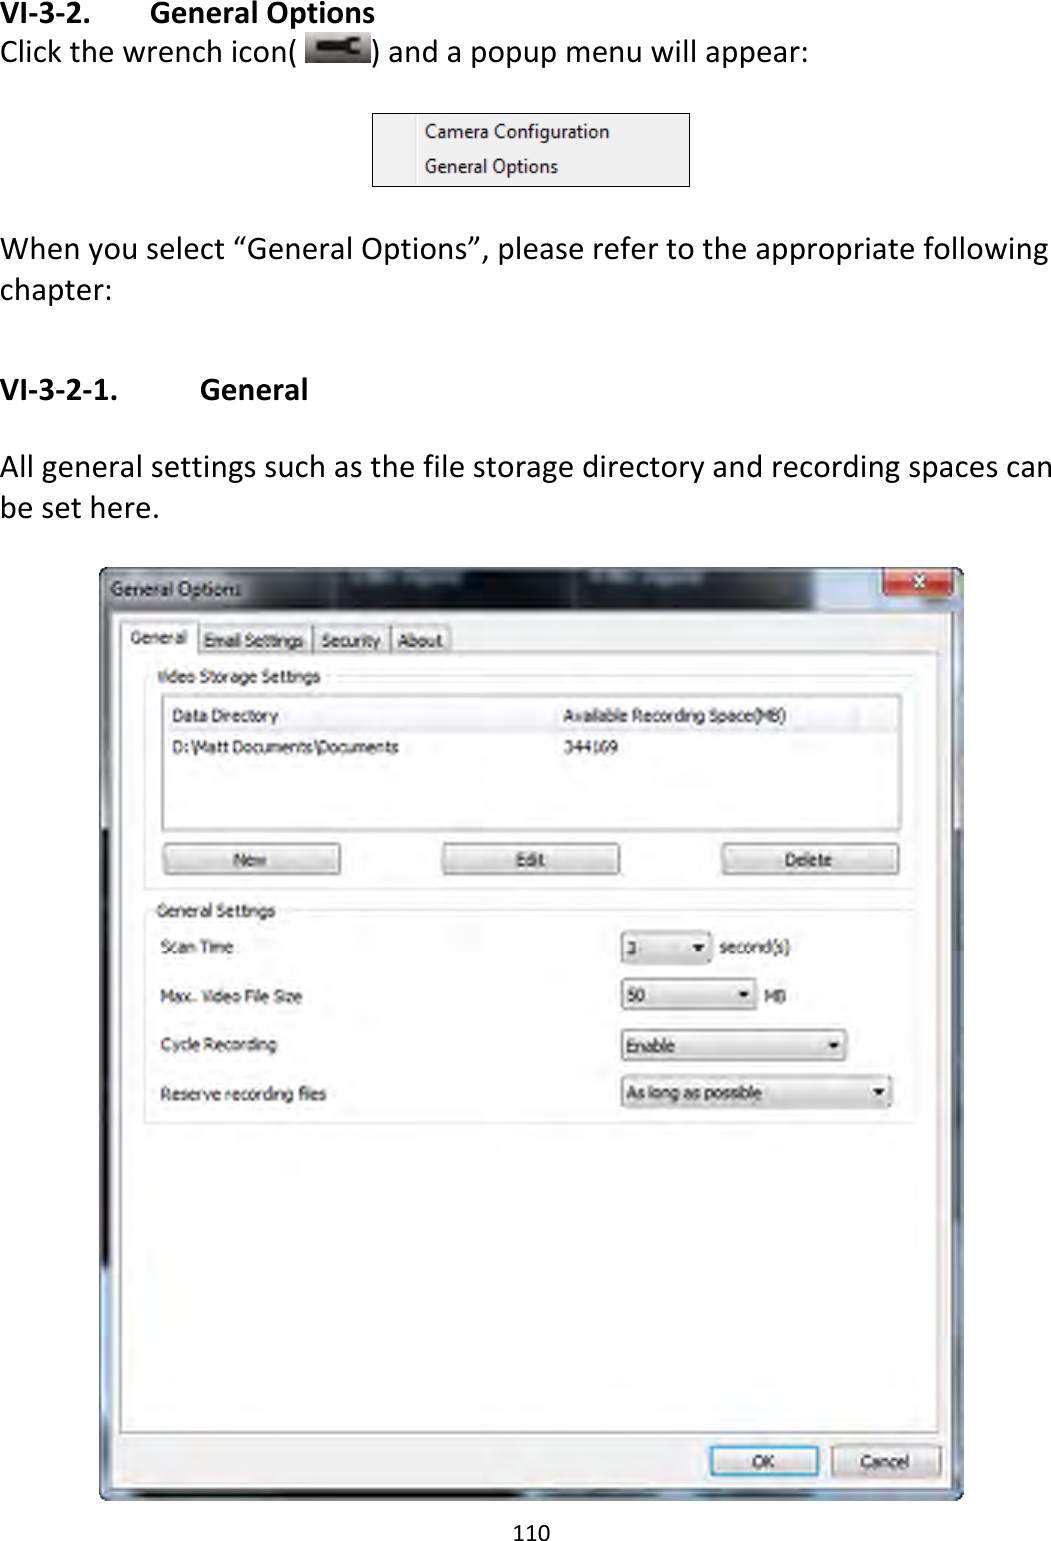 110  VI-3-2.   General Options Click the wrench icon(  ) and a popup menu will appear:    When you select “General Options”, please refer to the appropriate following chapter:  VI-3-2-1.    General  All general settings such as the file storage directory and recording spaces can be set here.   